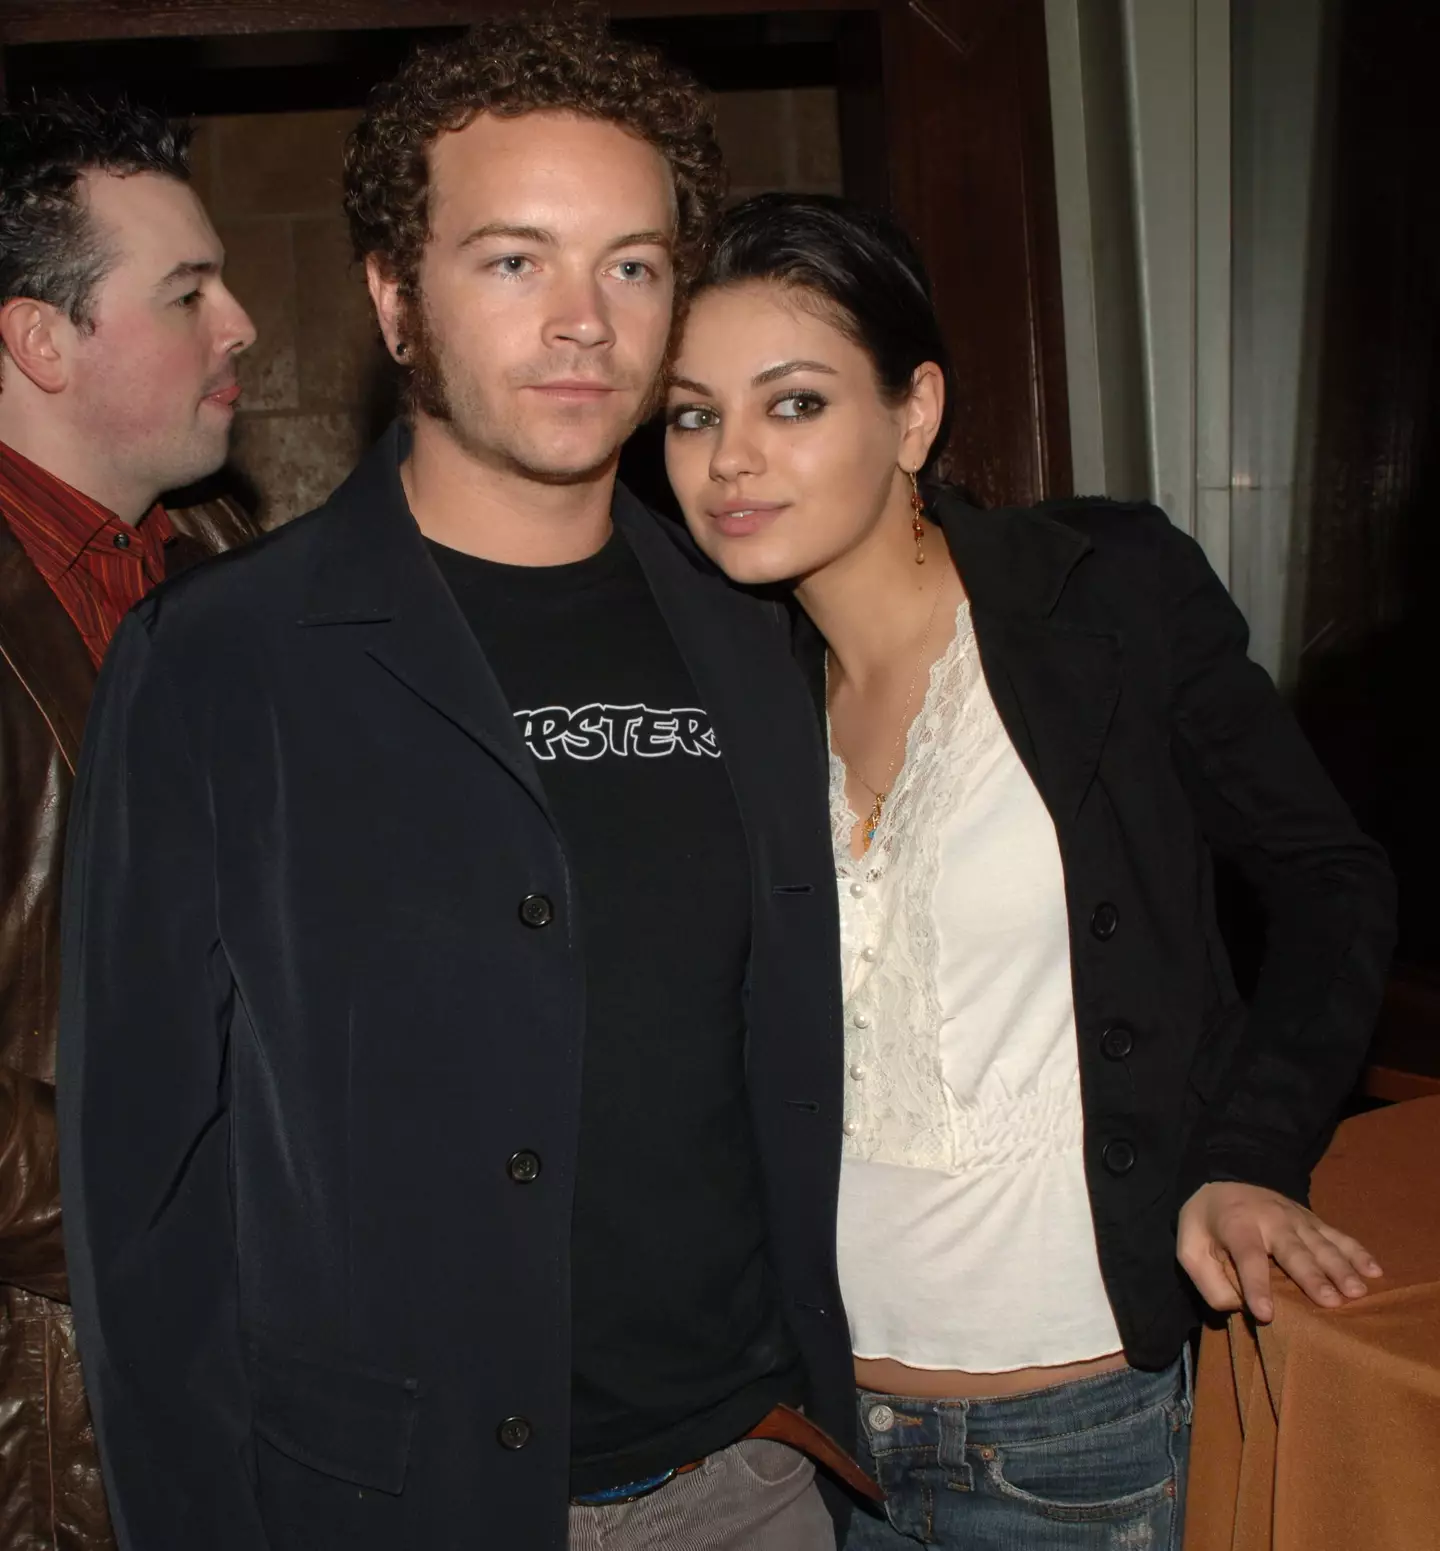 Mila Kunis has been slammed for her support of Danny Masterson.